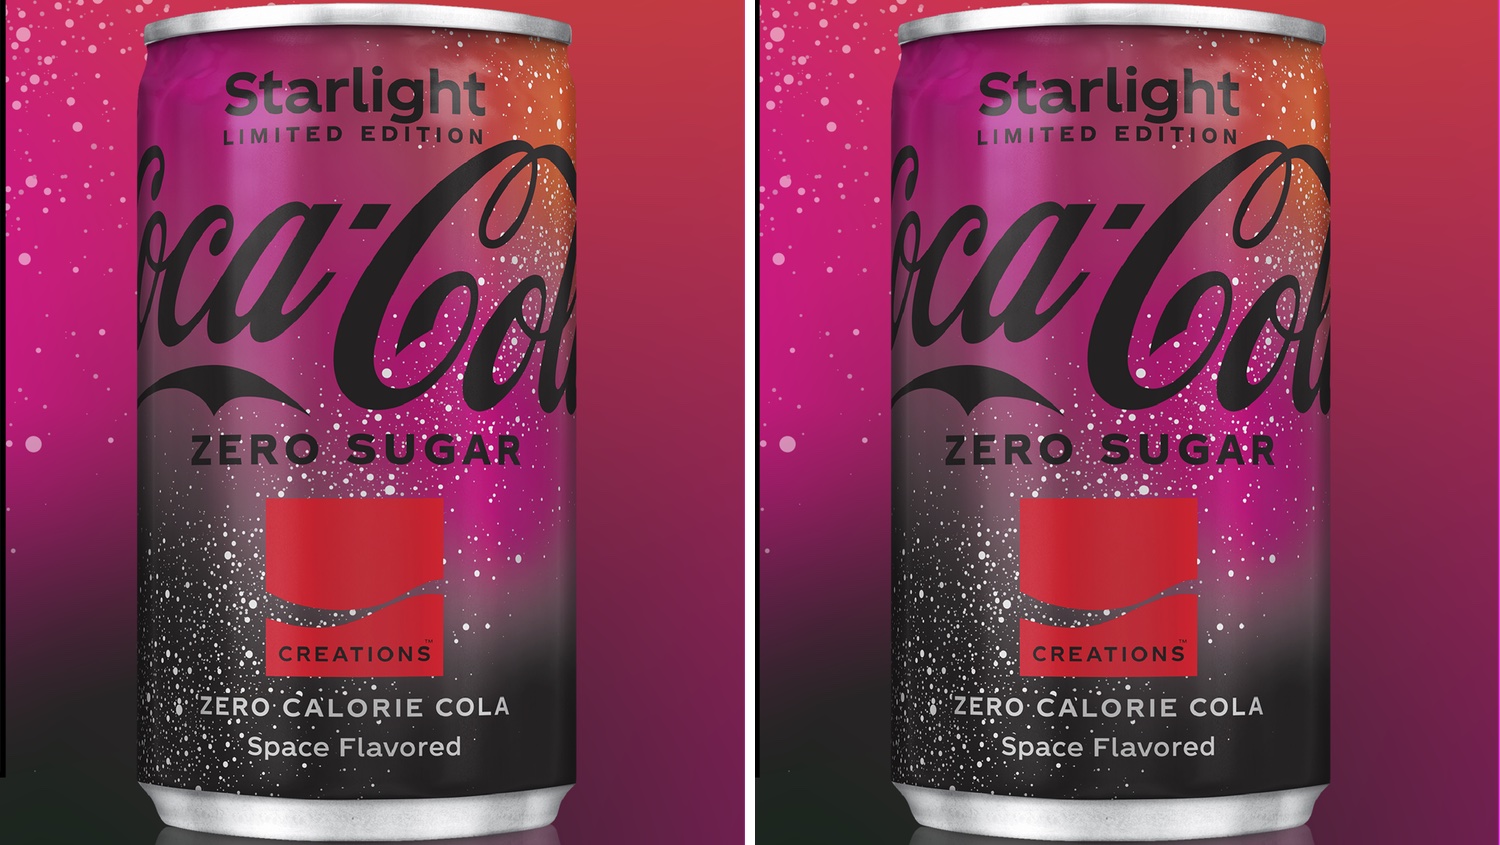 Cans of new Coke Starlight